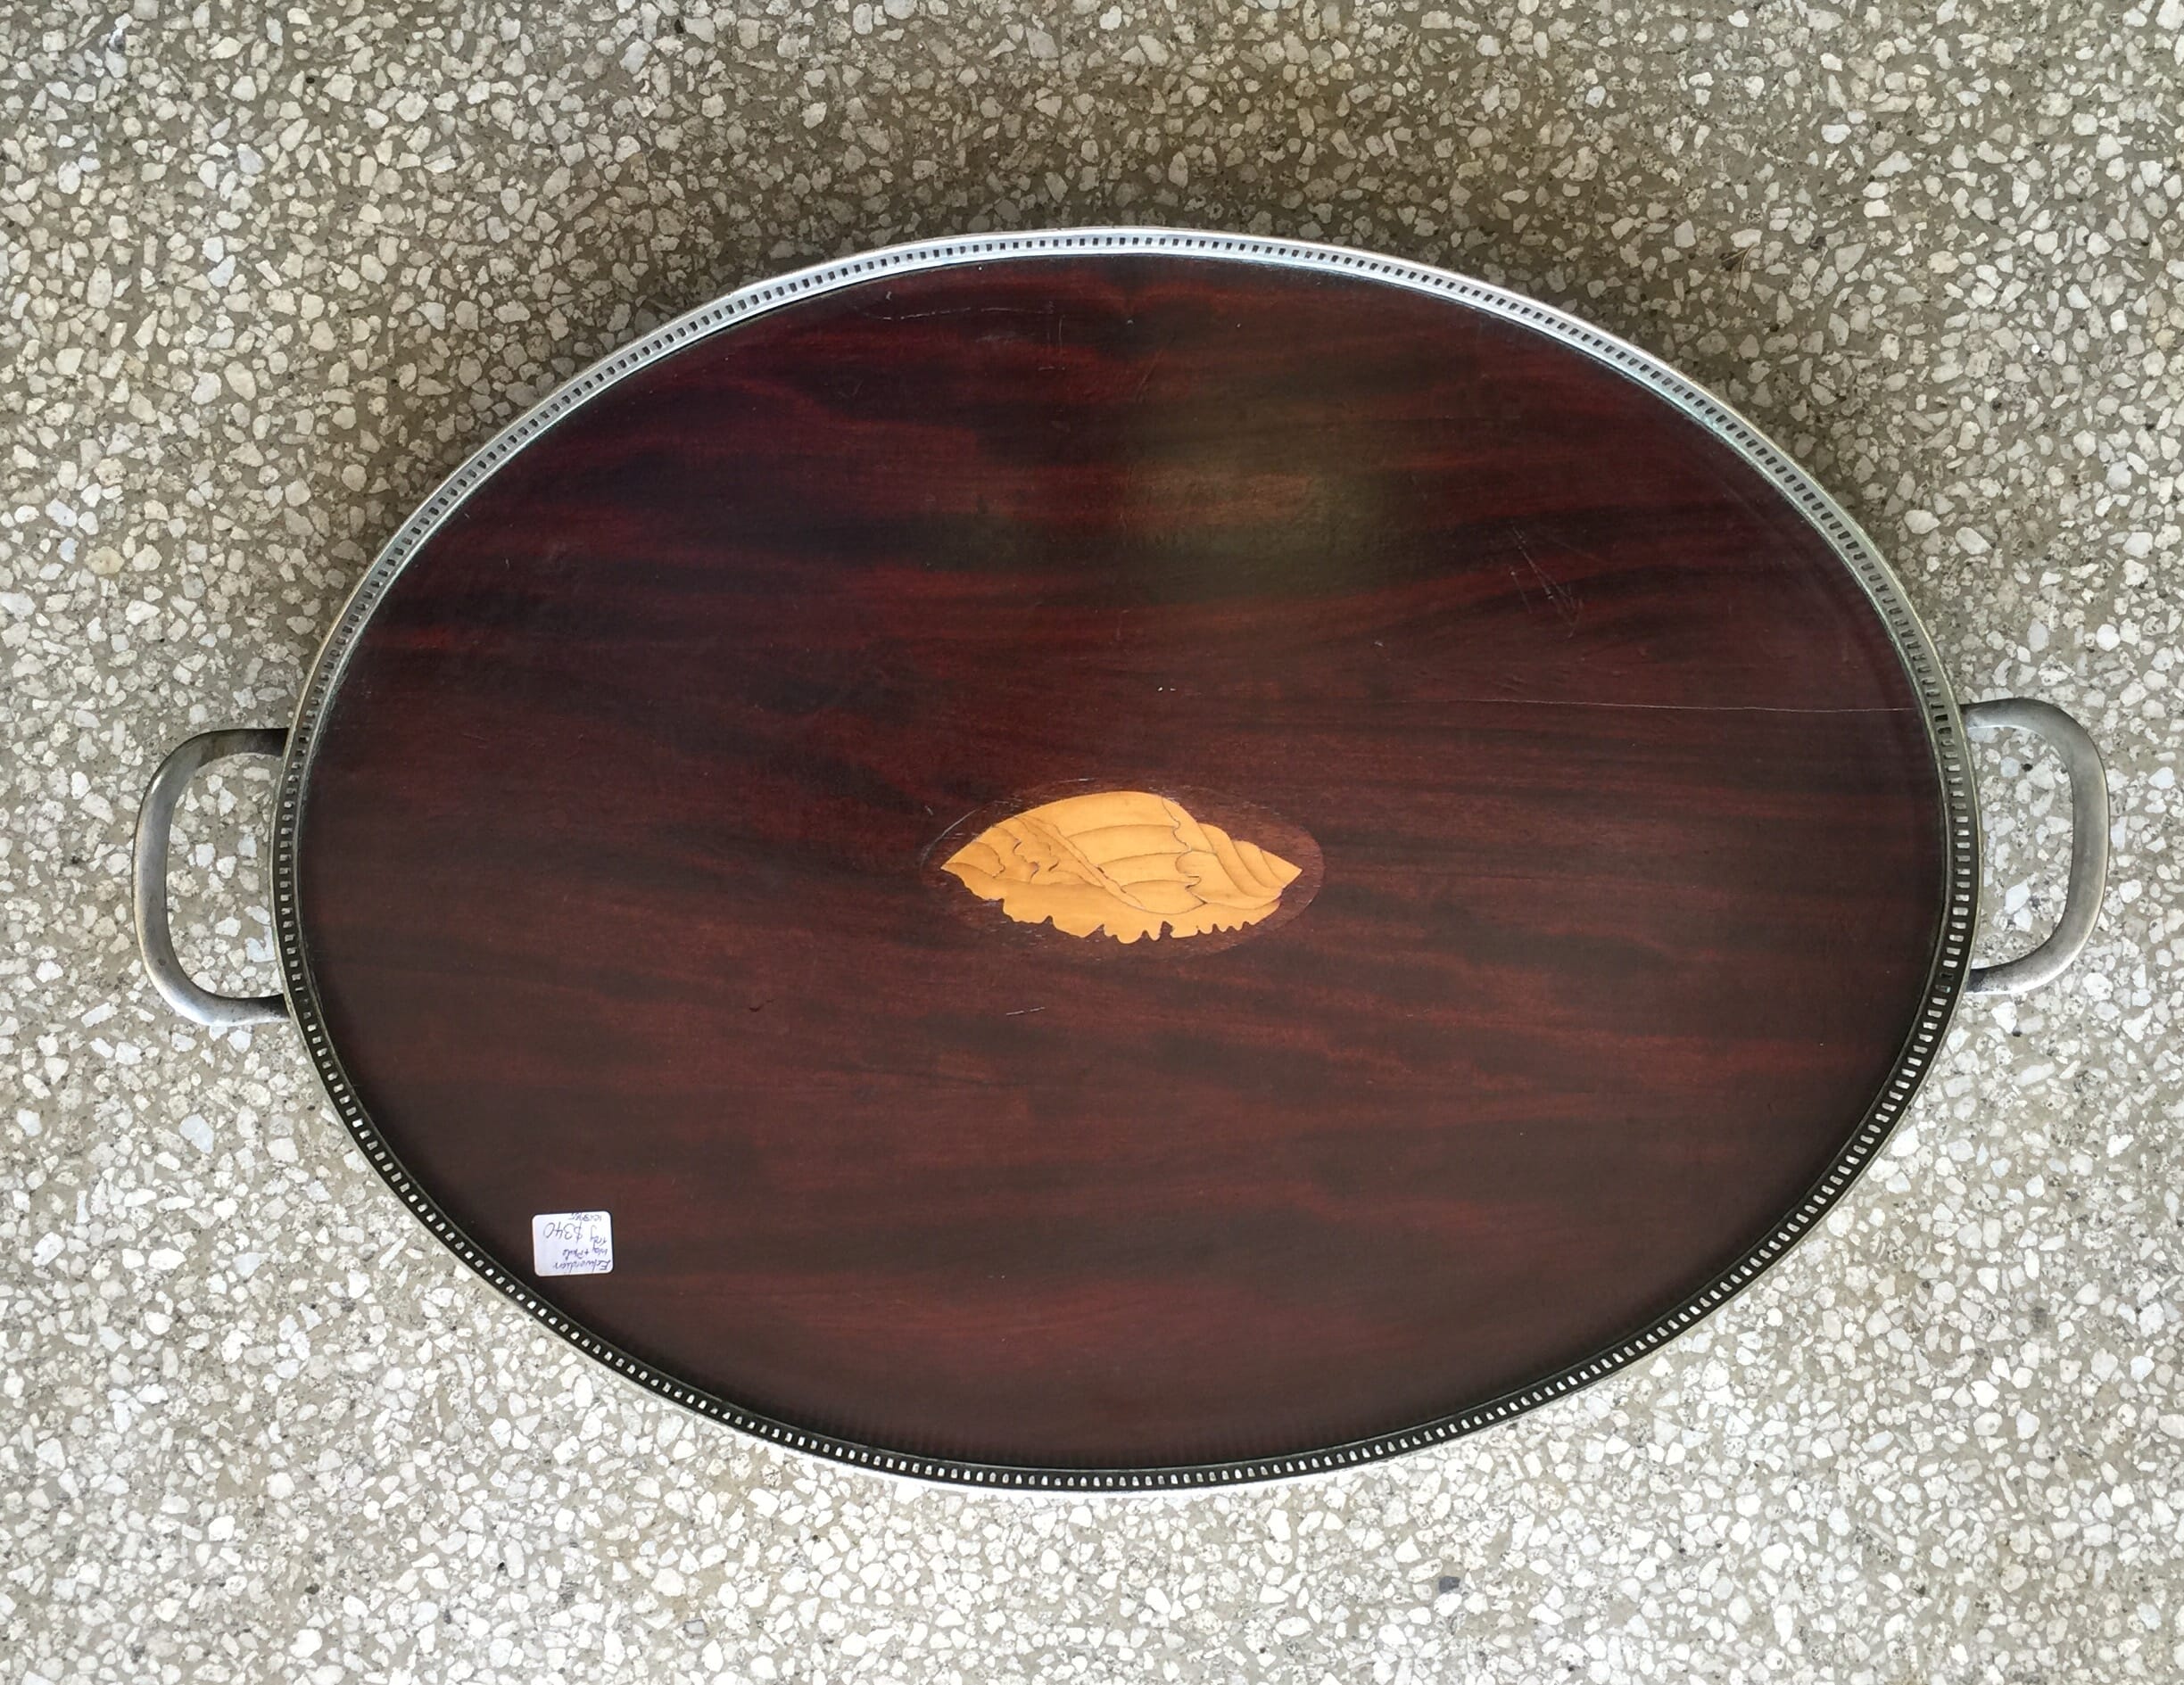 Sheraton oval tray, inlaid shell motif & plated gallery, c. 1900-0